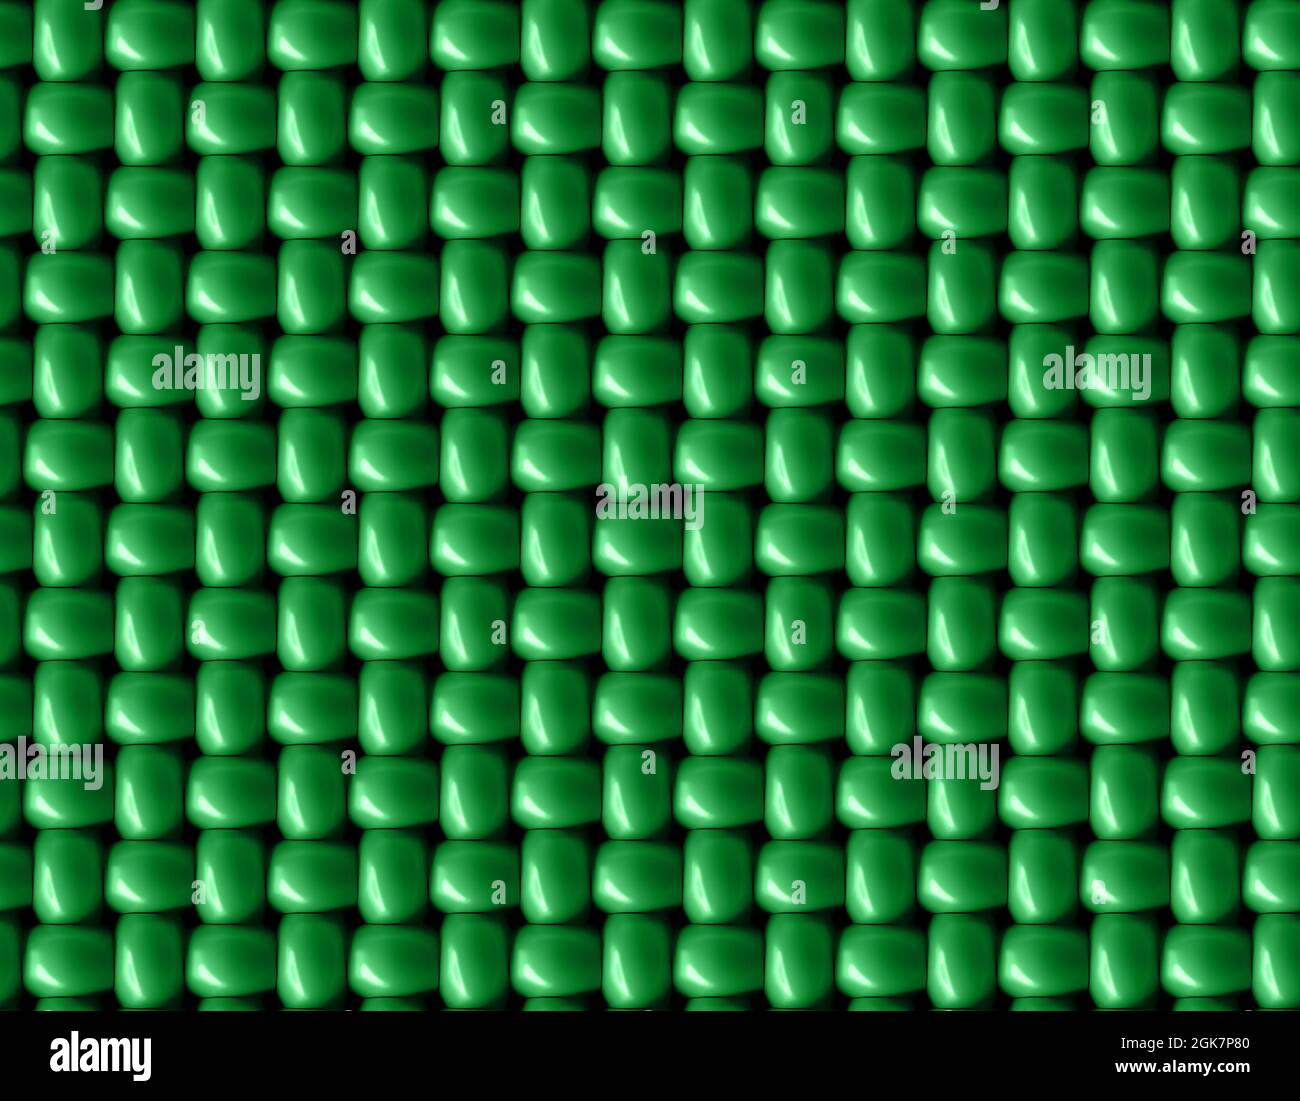 Modern and realistic weaved mesh in green plastic. Seamless repeating pattern. Illustration 3D. Stock Photo